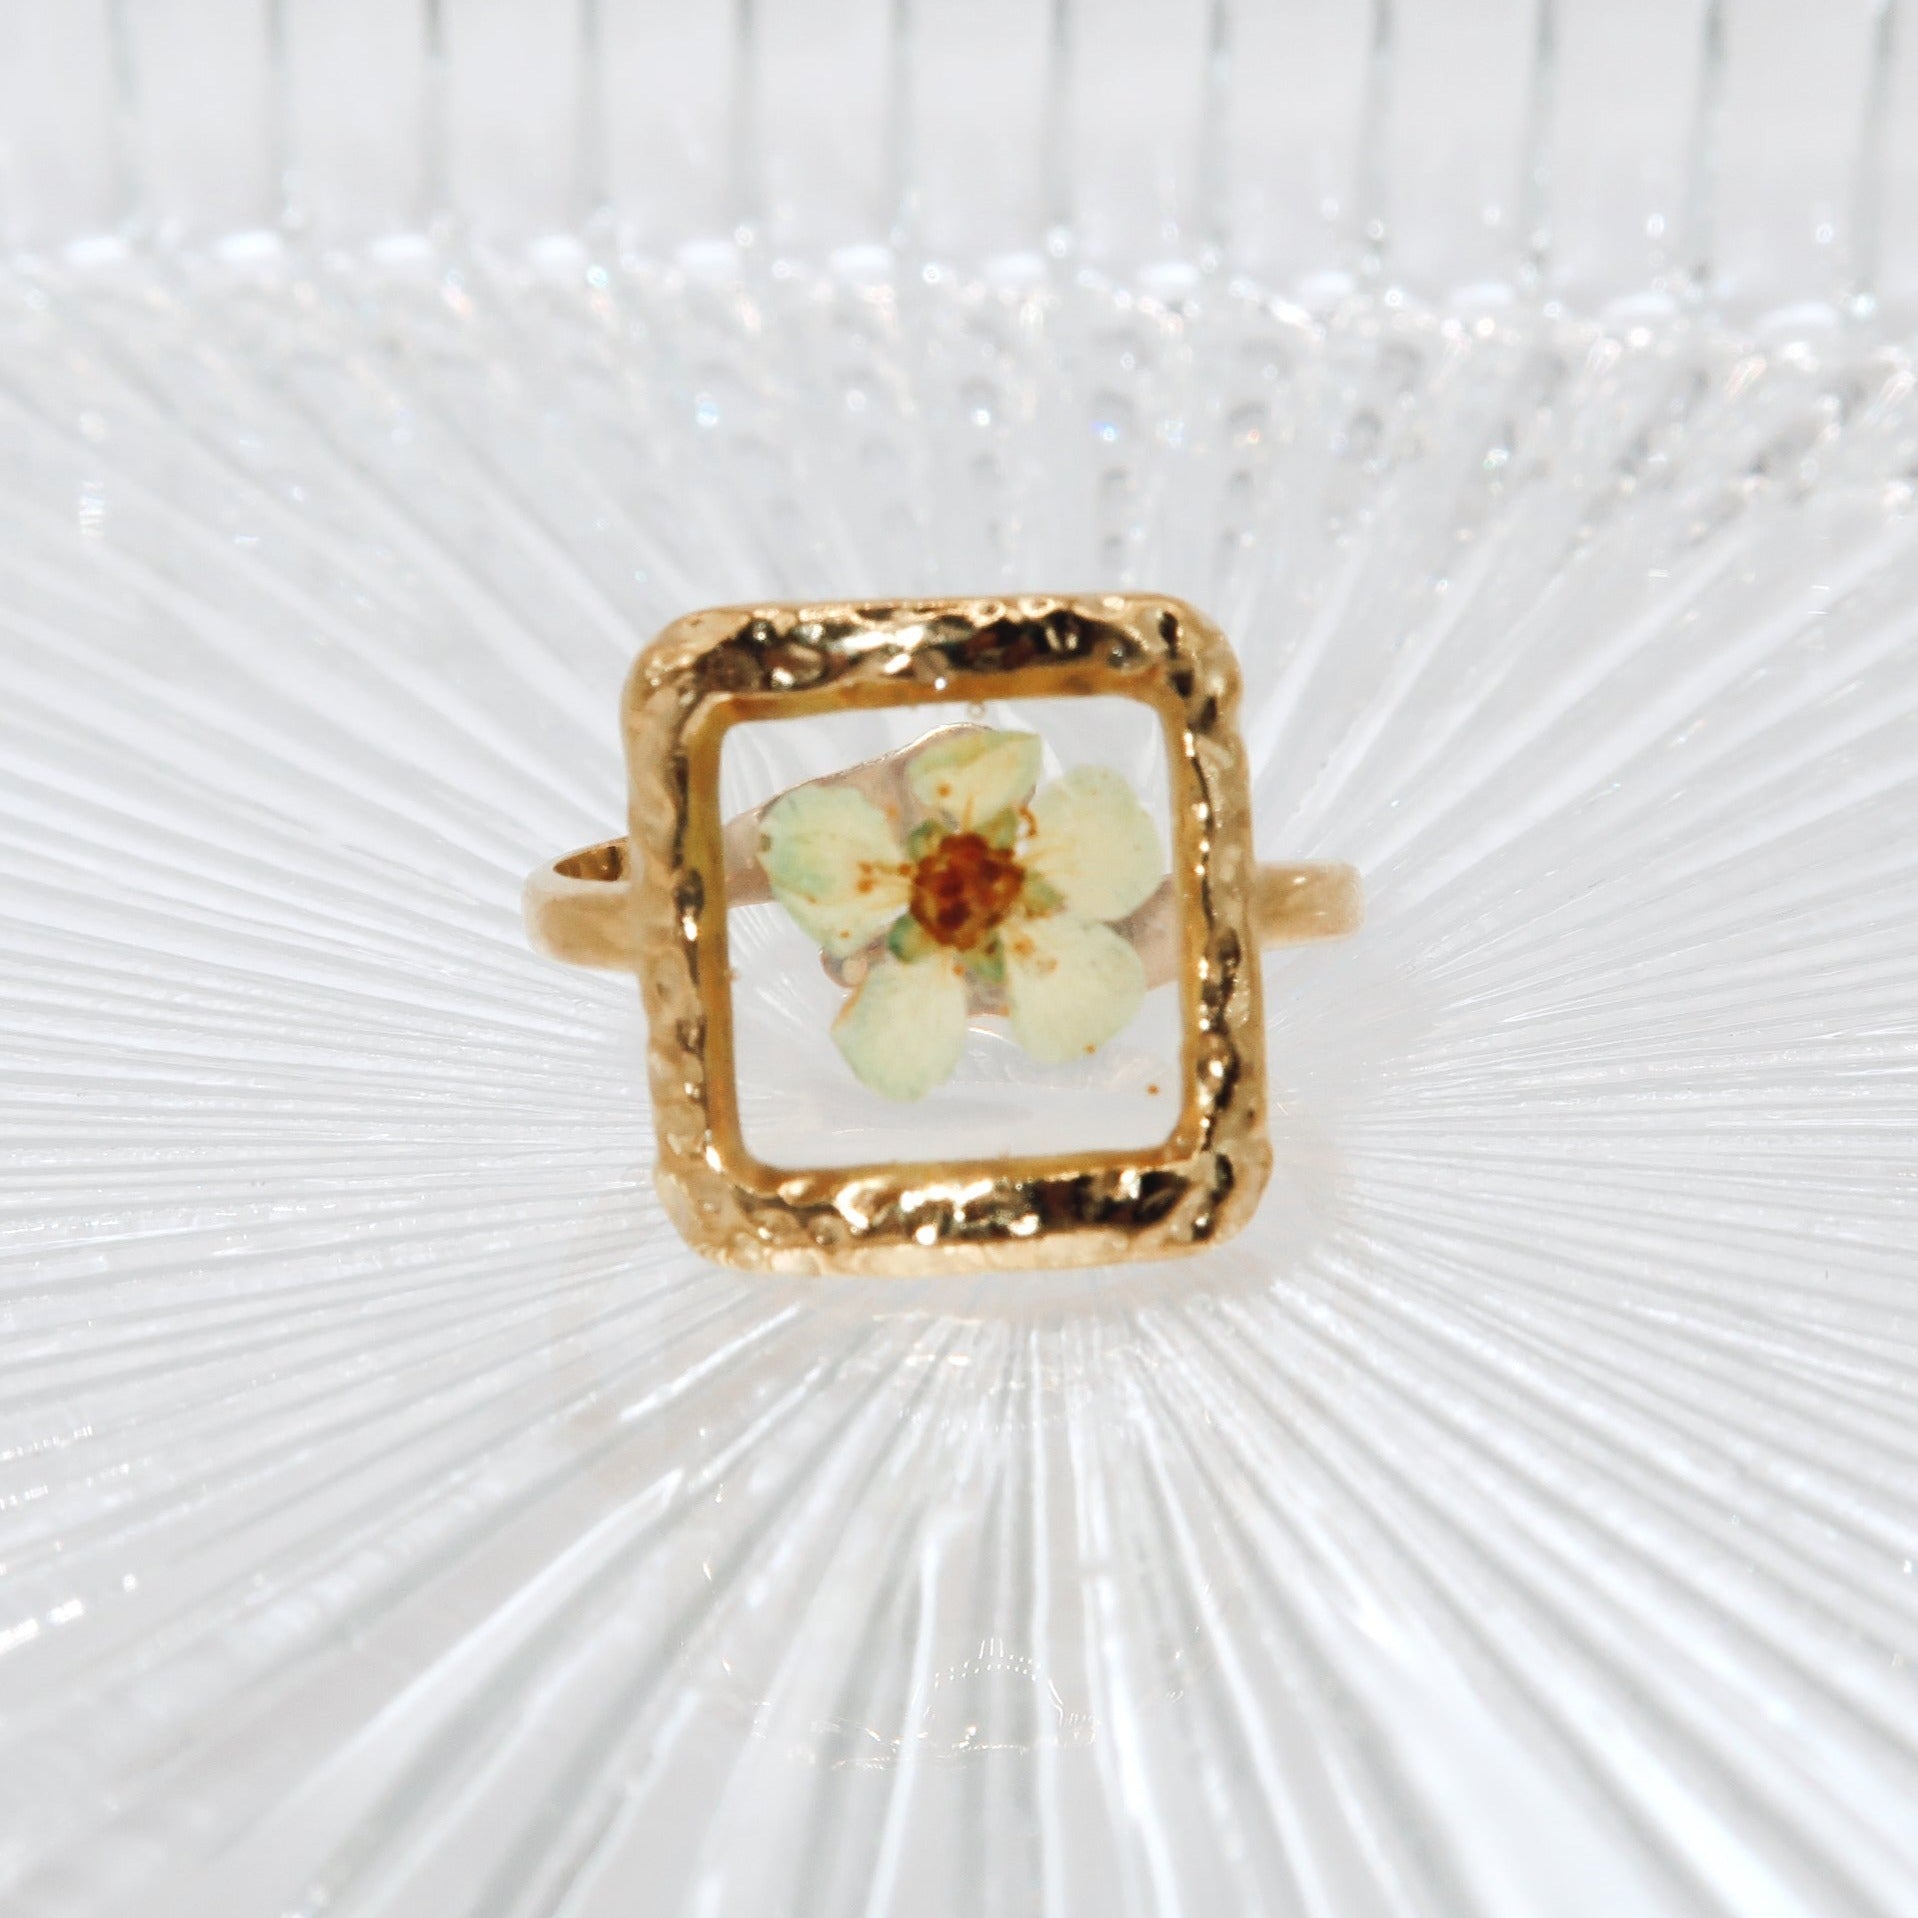 ZOE - 18K PVD Gold Plated Square Shaped Colorful Plum Flower Ring - Mixed Metals